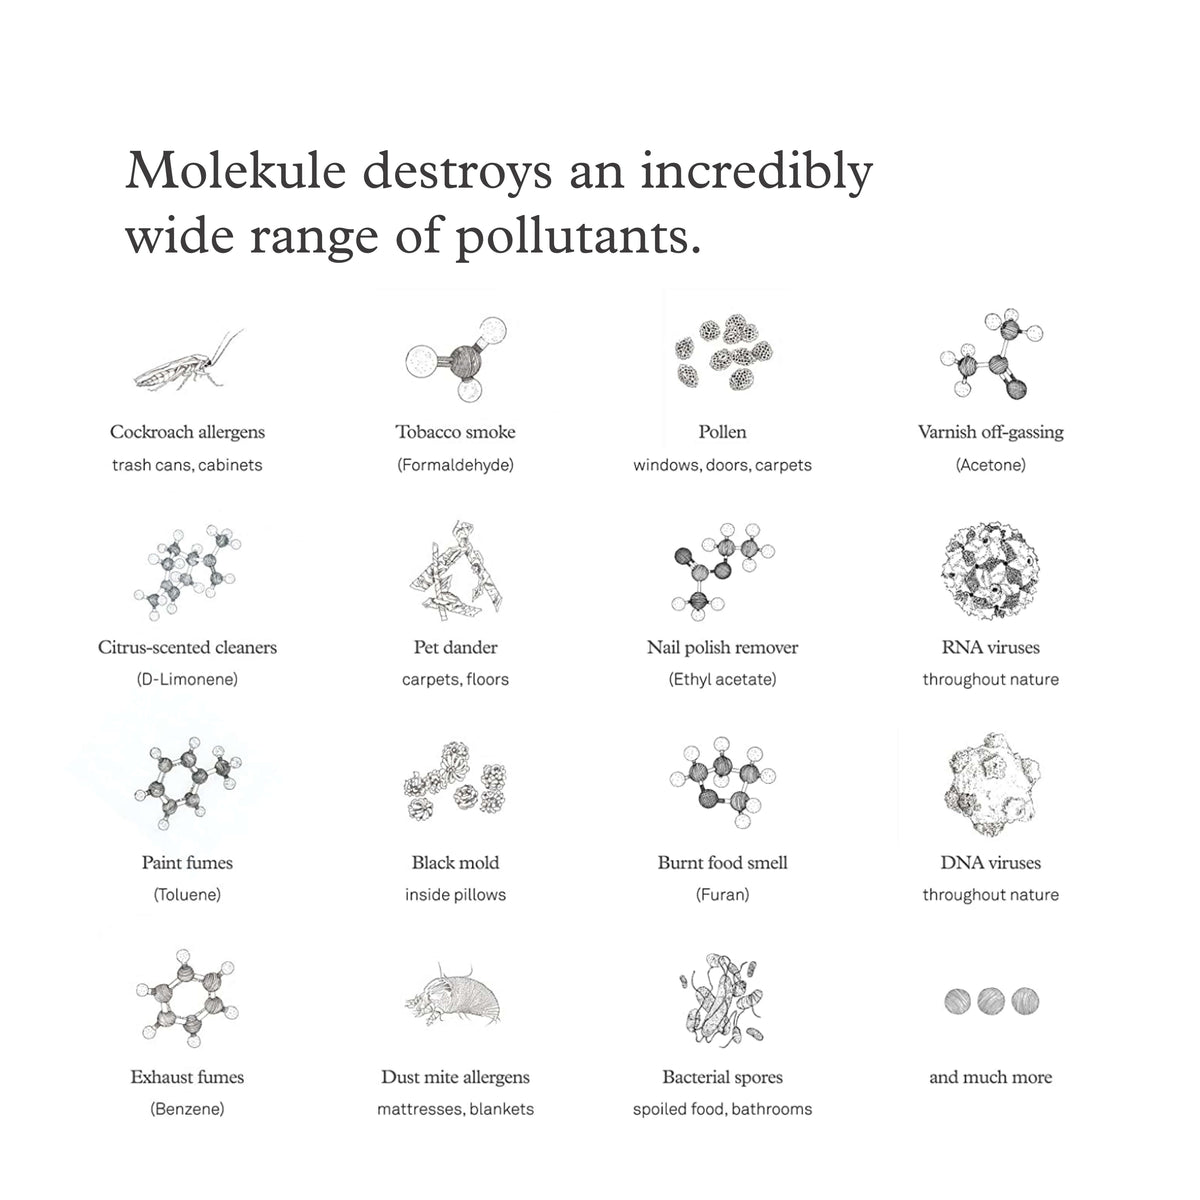 Molekule destroys an incredibly wide range of pollutants. Cockroach allergens. Tobacco smoke. Pollen. Varnish off-gassing. Citrus-scented cleaners. Pet dander. Nail polish remover. RNA viruses. Paint fumes. Black mold. Burnt food smell. DNA viruses. Exhaust fumes. Dust mite allergens. Bacterial spores. And much more. 